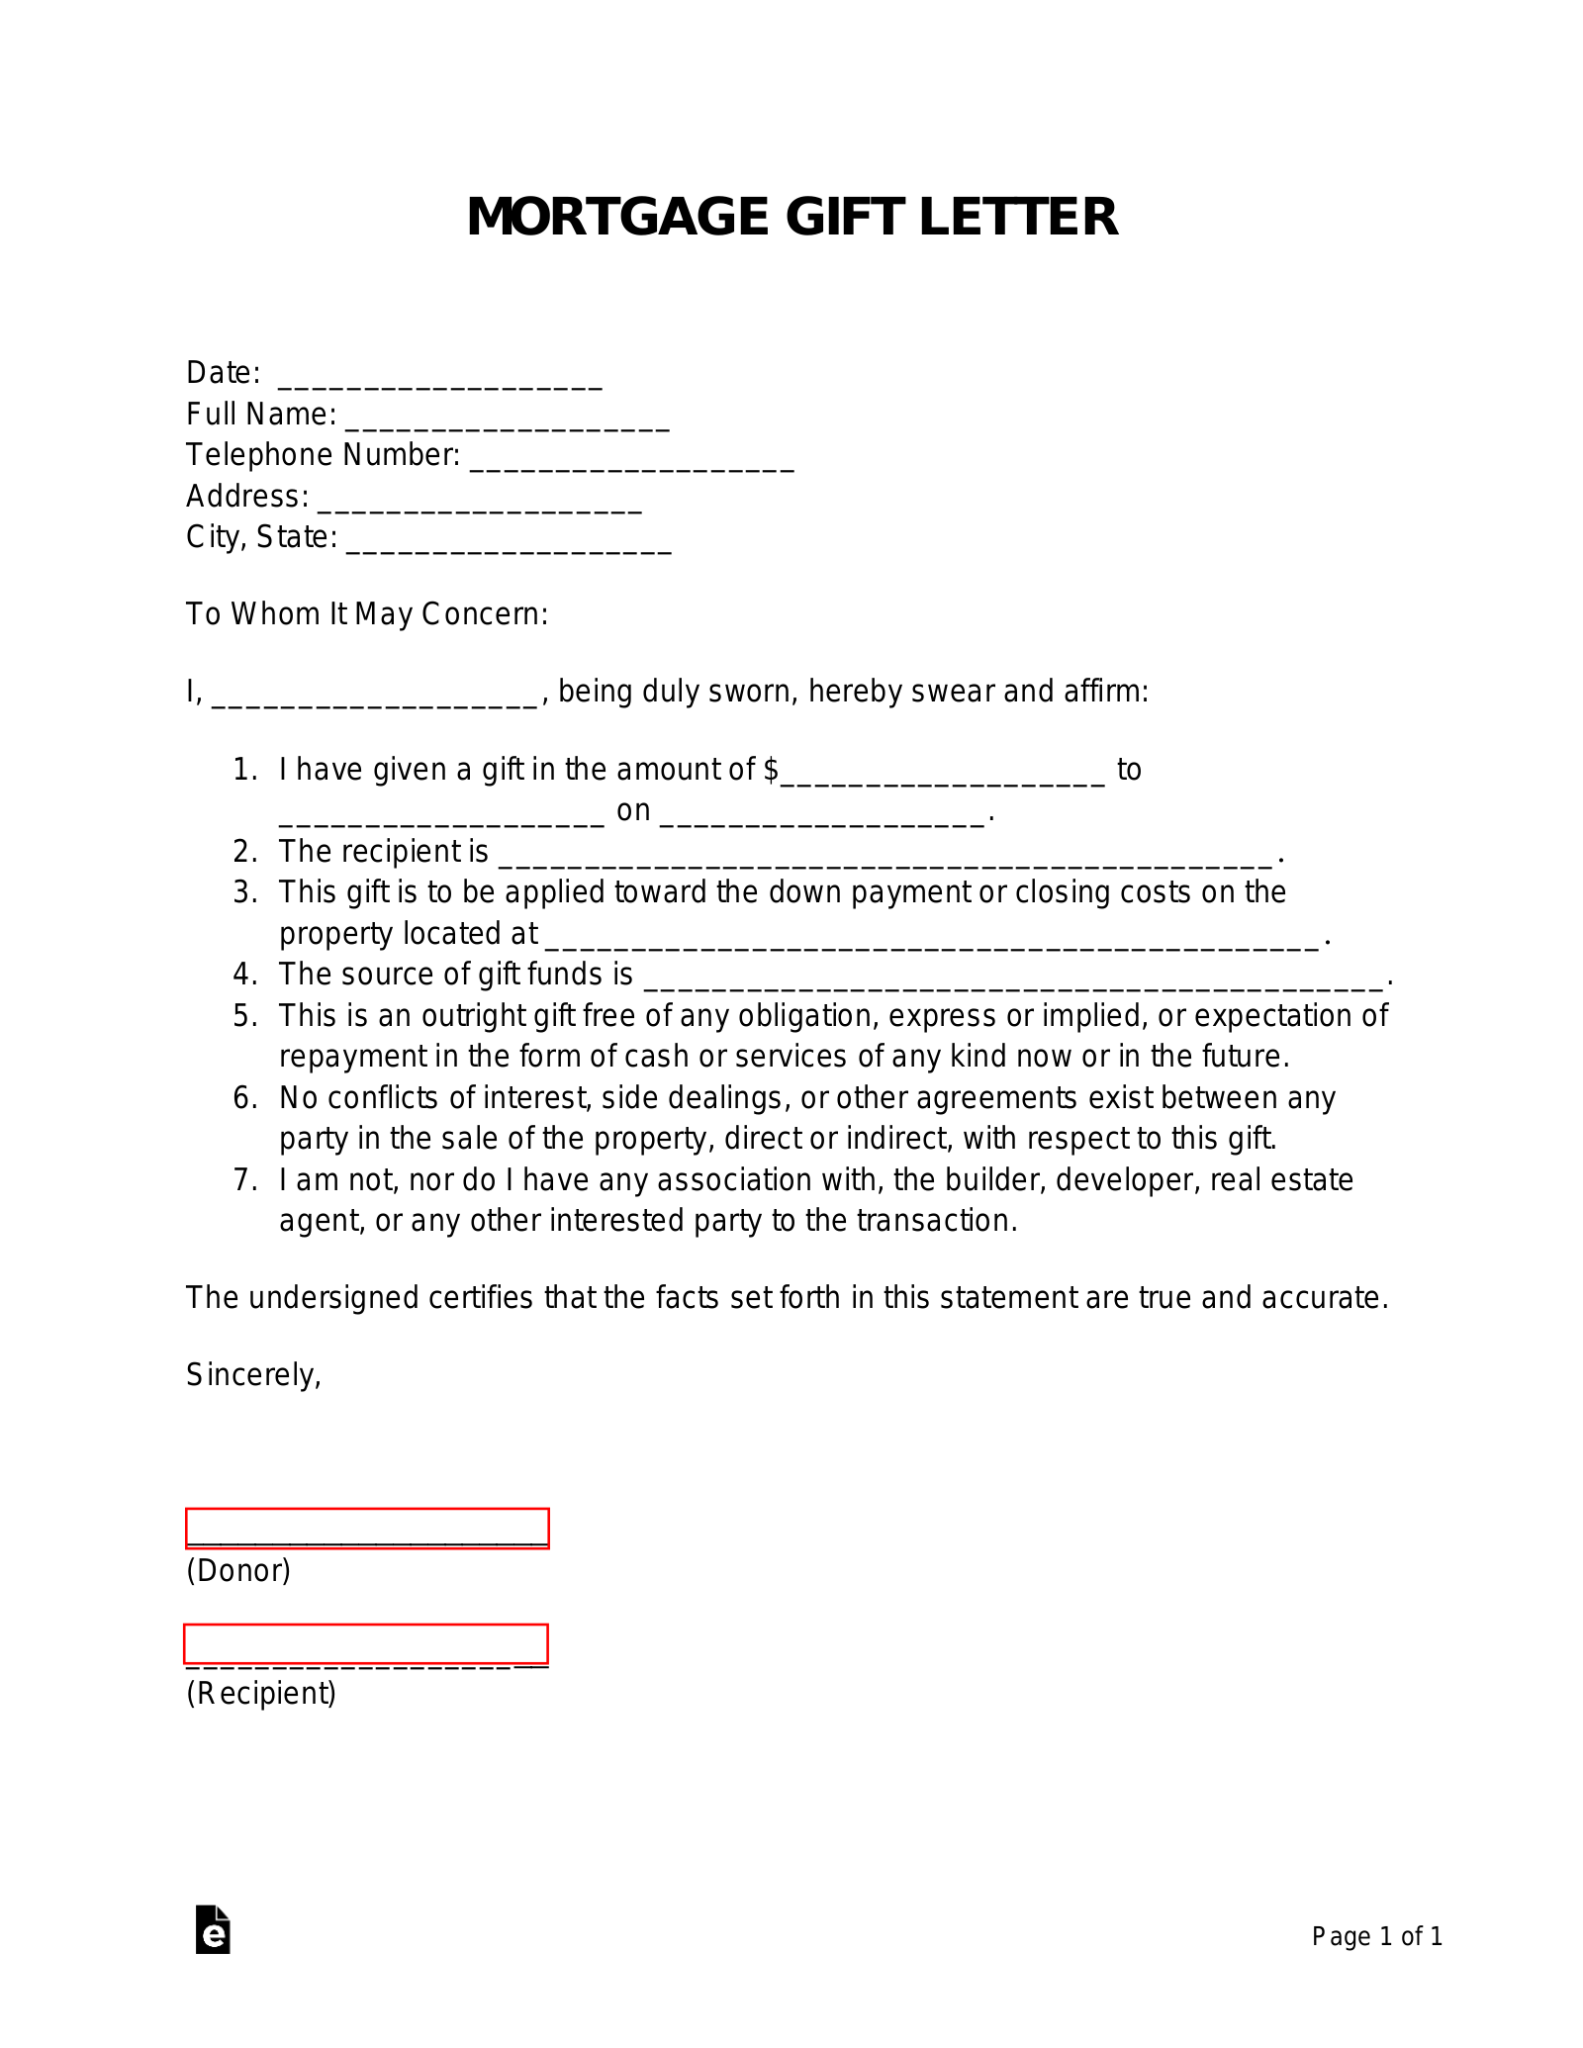 free-gift-letter-for-mortgage-template-pdf-word-eforms